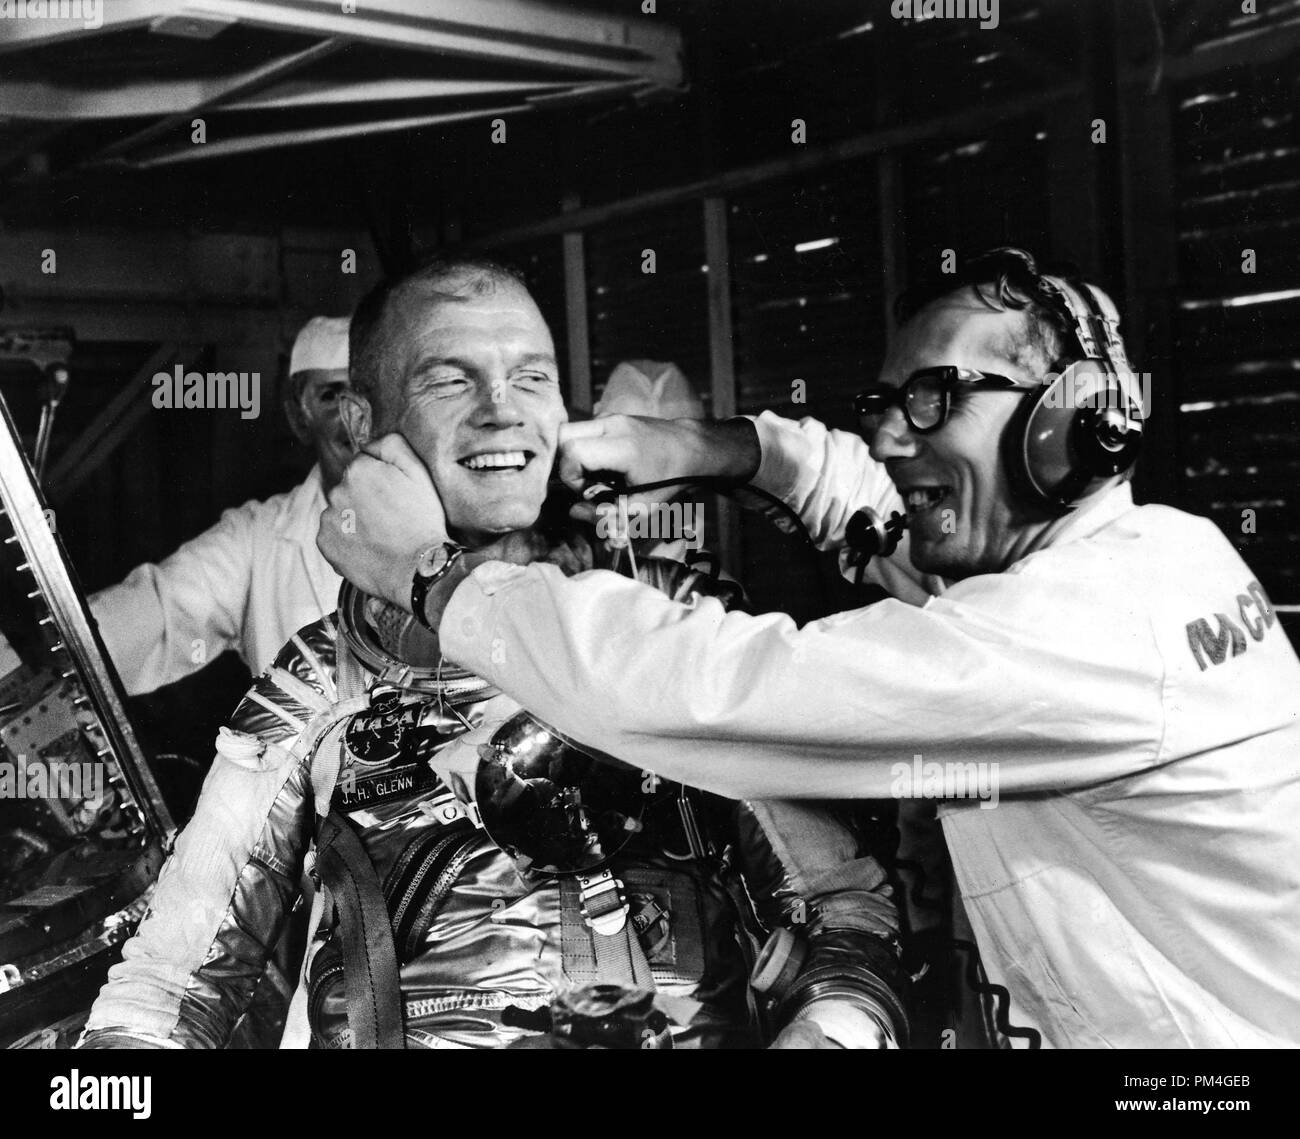 Guenter Wendt, the original pad leader for NASA's manned space program, coaxes a smile out of astronaut John Glenn after the MA-6 mission was scrubbed. January 27, 1962 Photo: NASA   File Reference # 1001 013THA Stock Photo